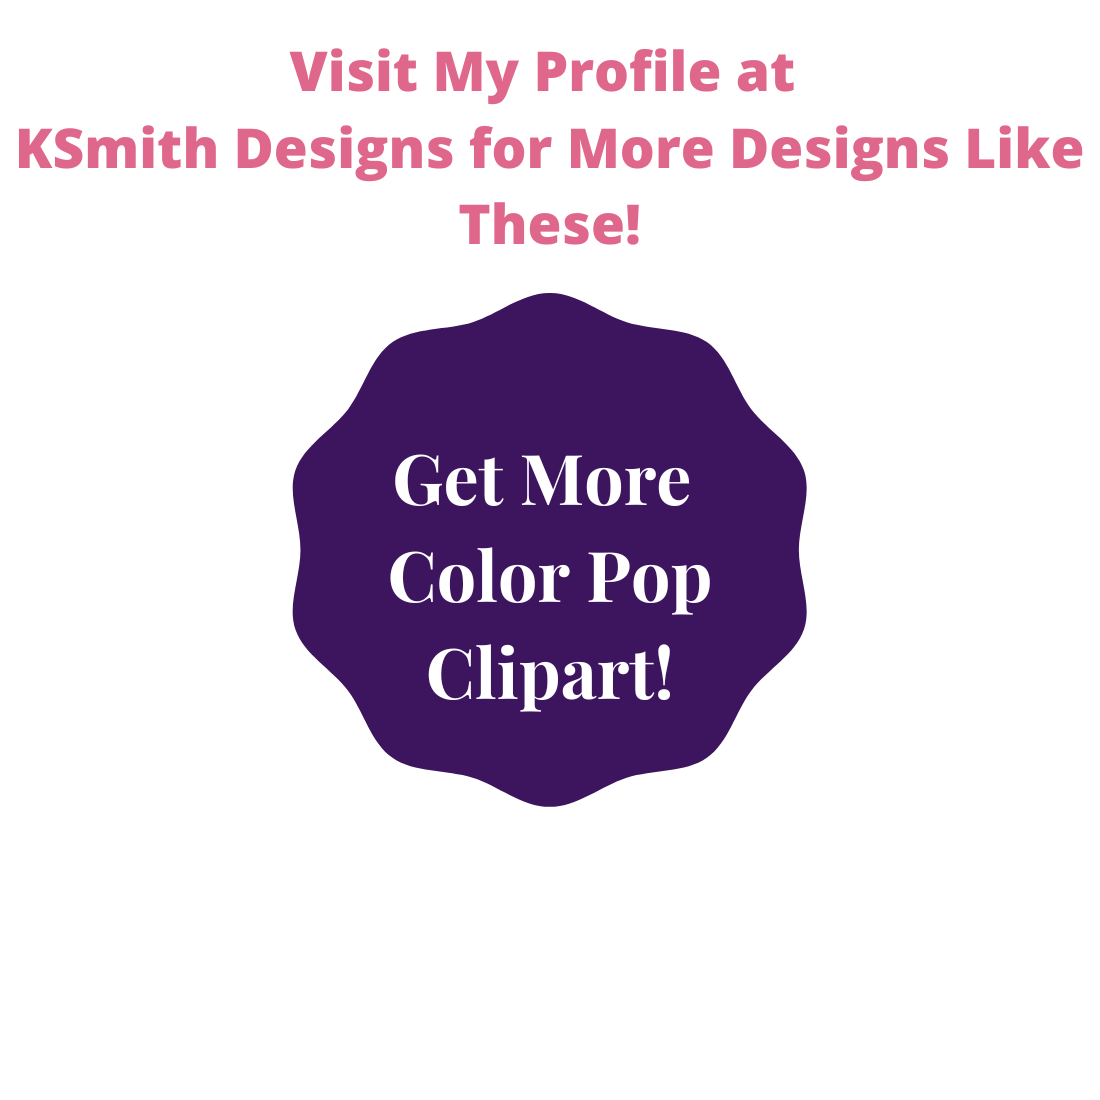 15 COLOR POP CLIPART IMAGES OF LAMPS preview image.